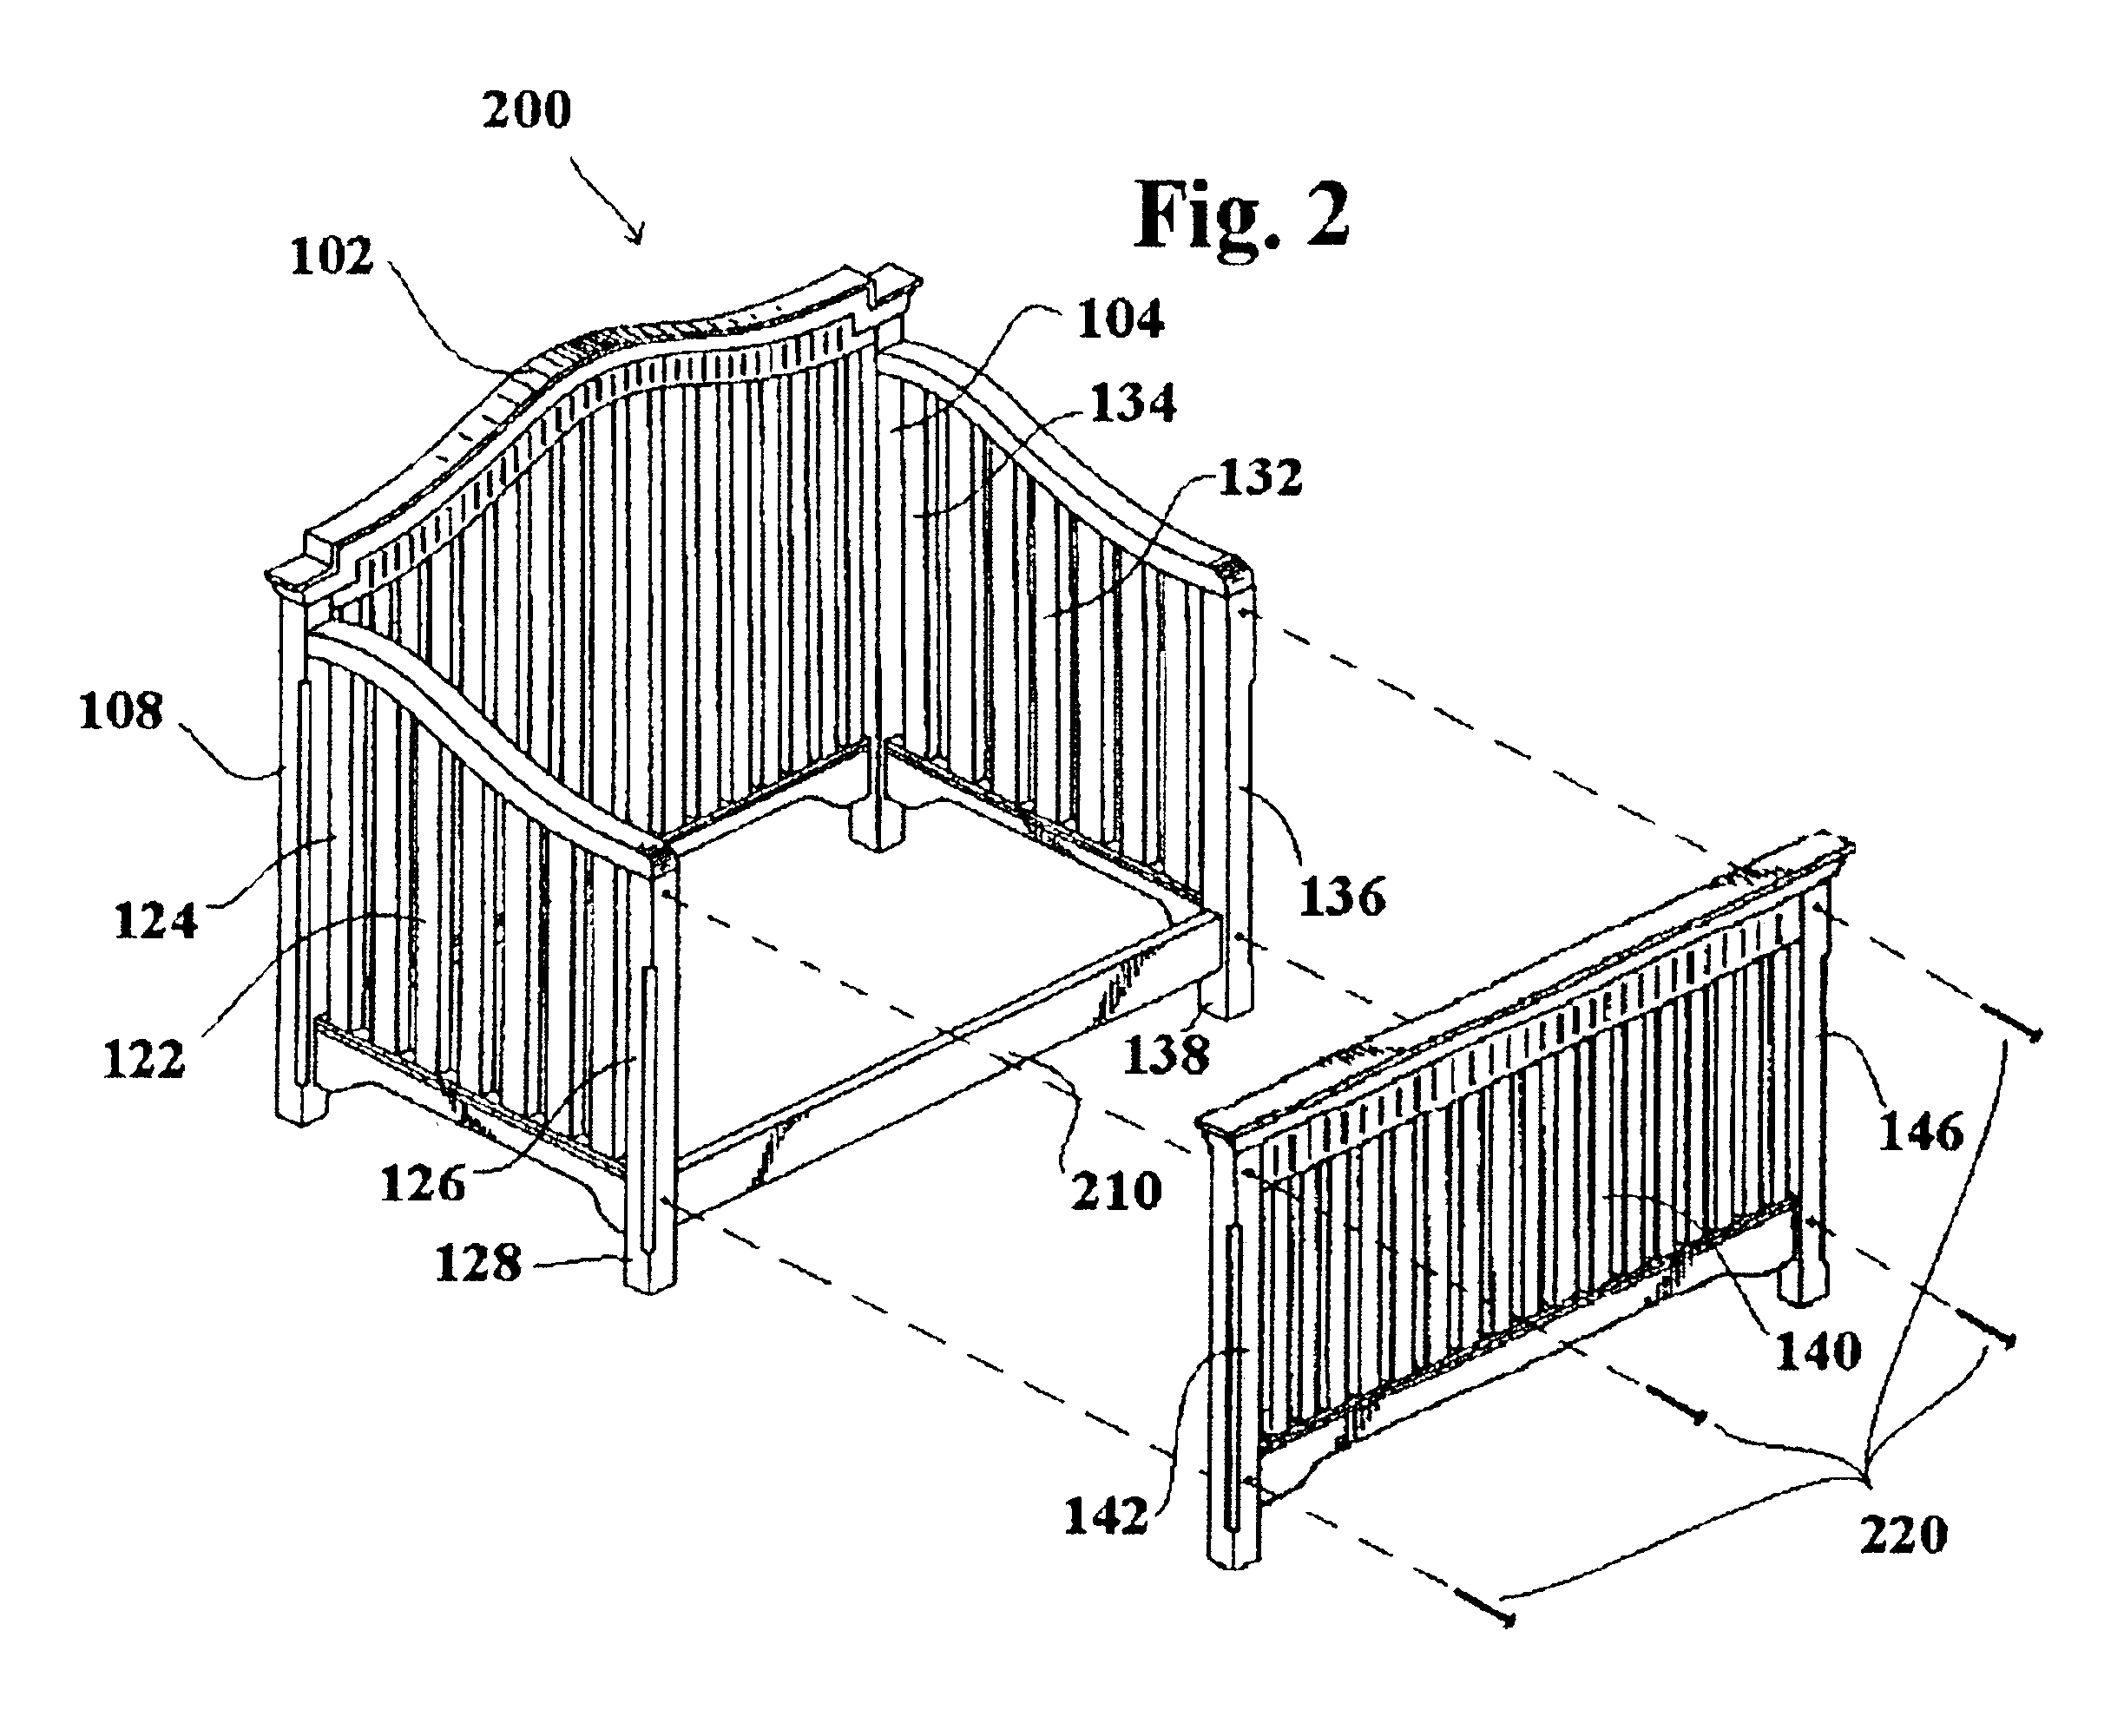 Convertible crib and bed arrangement